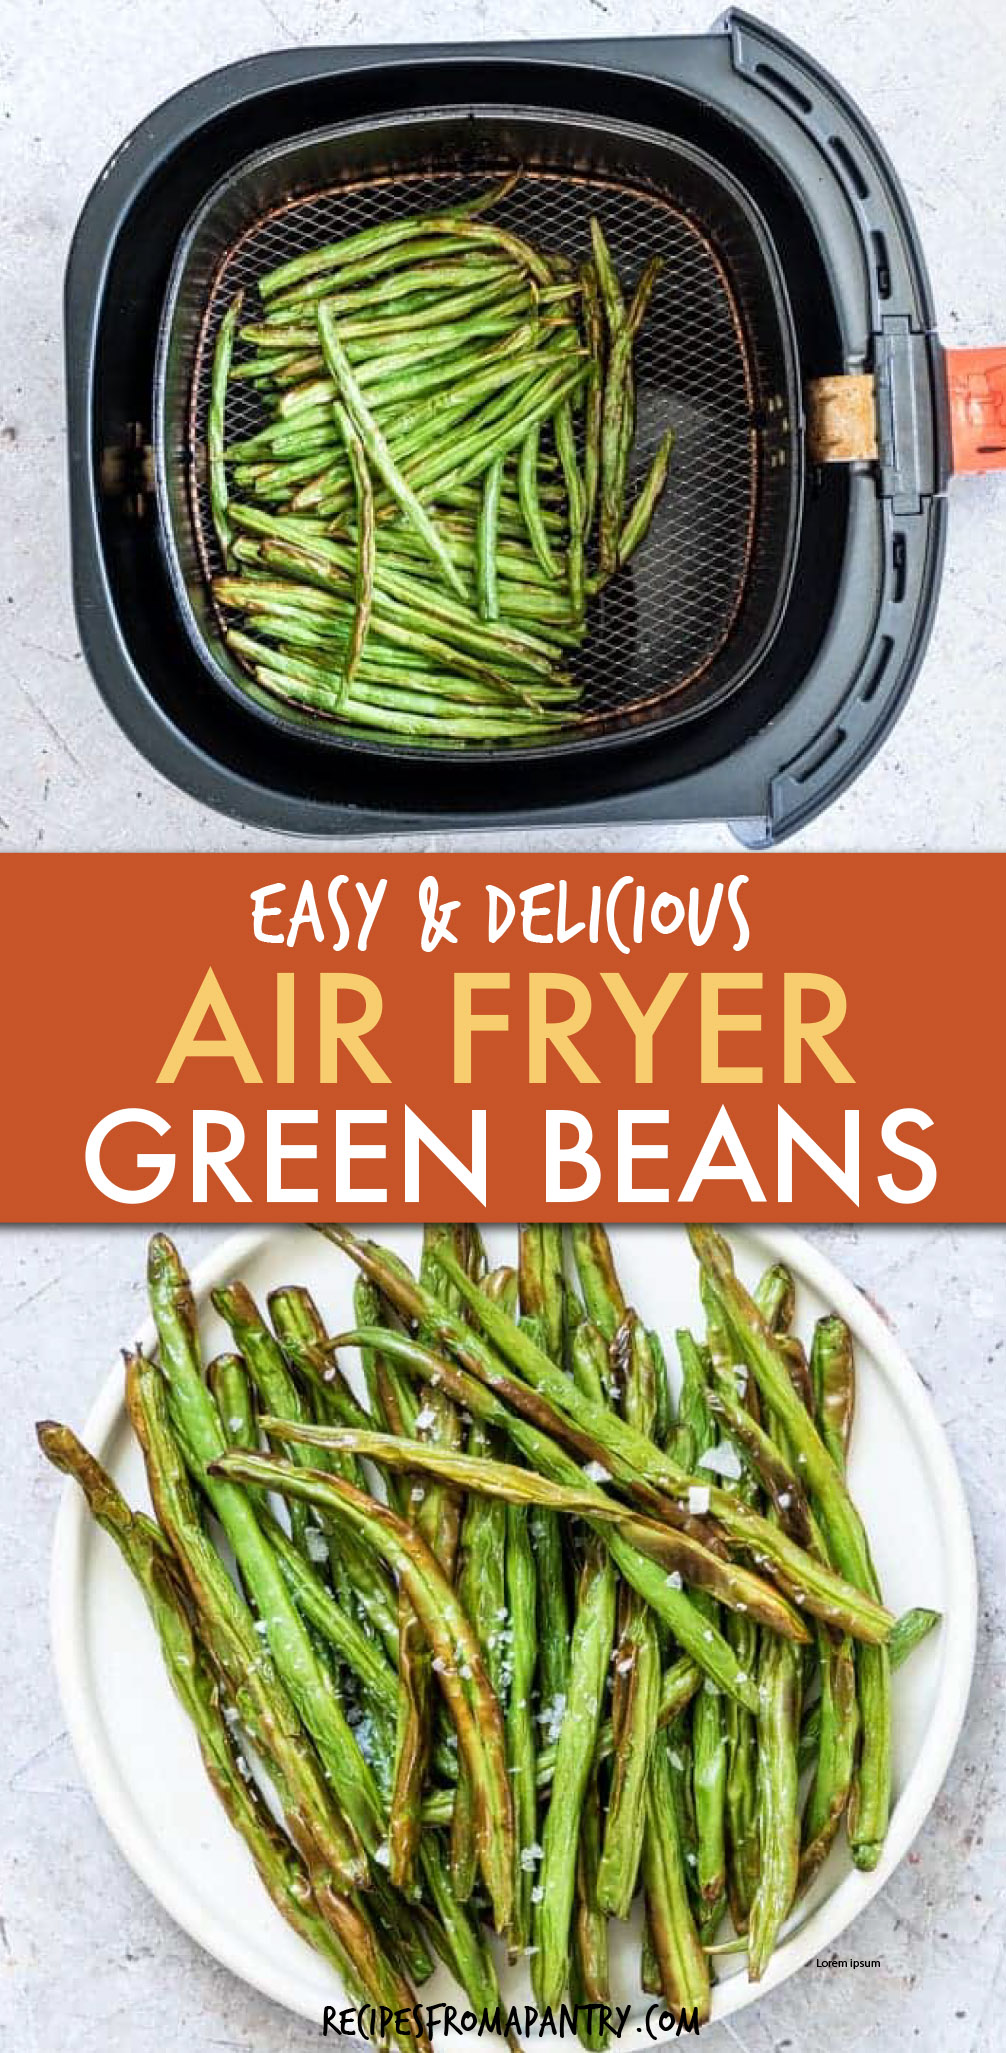 TWO PICTURES OF GREEN BEANS IN AN AIR FRYER AND ON A PLATE